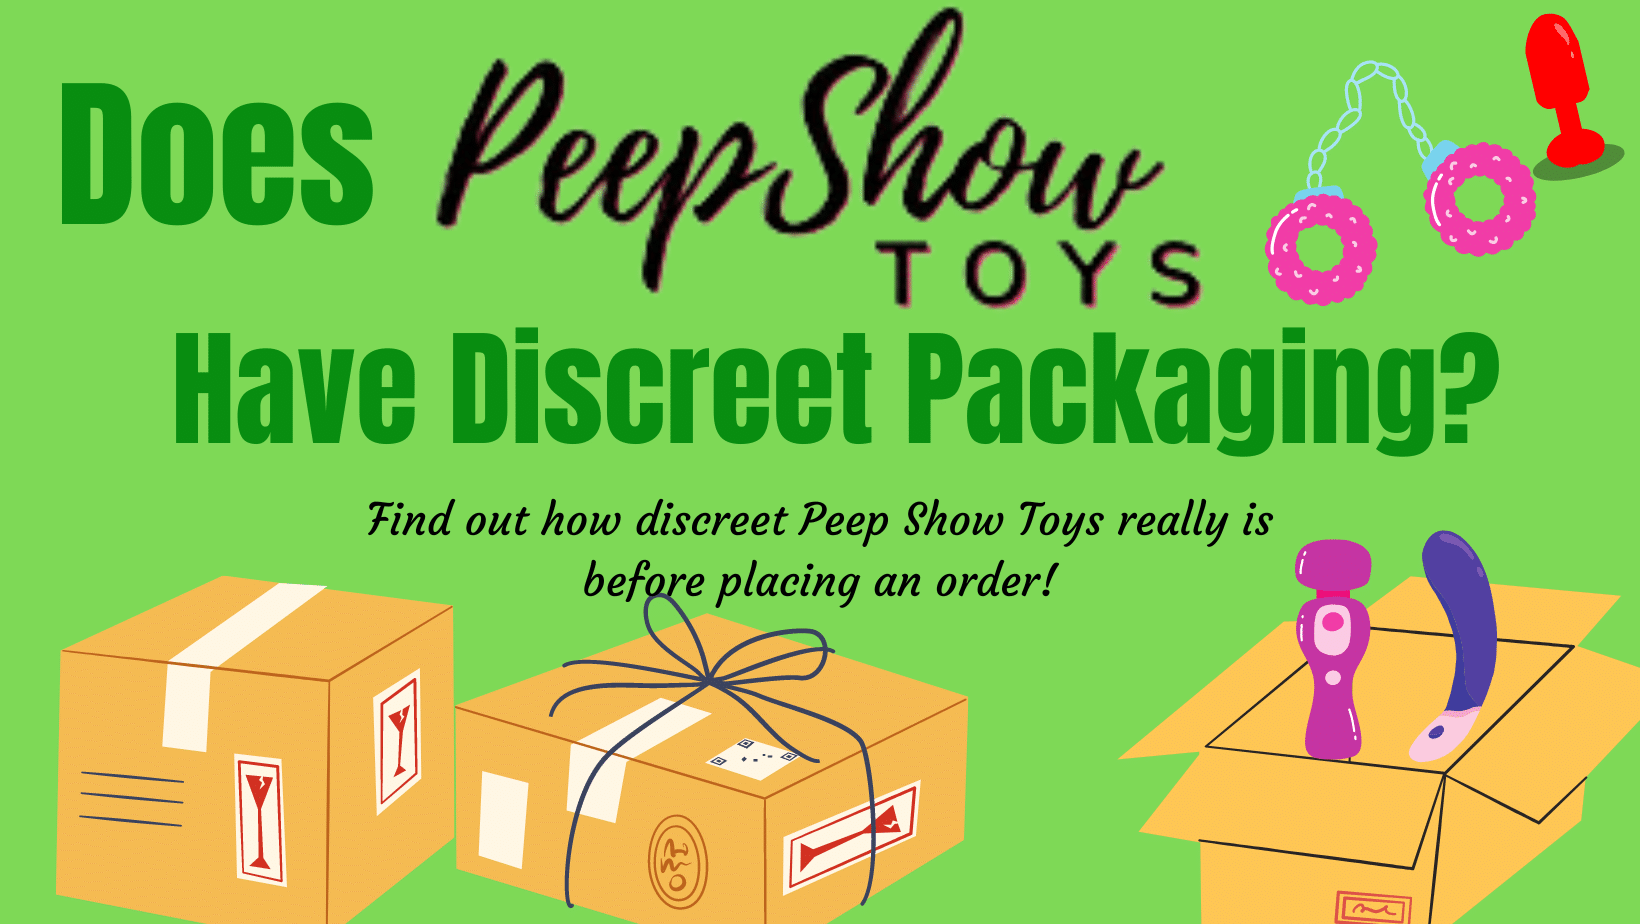 Does PeepShow Toys Have Discreet Packaging?